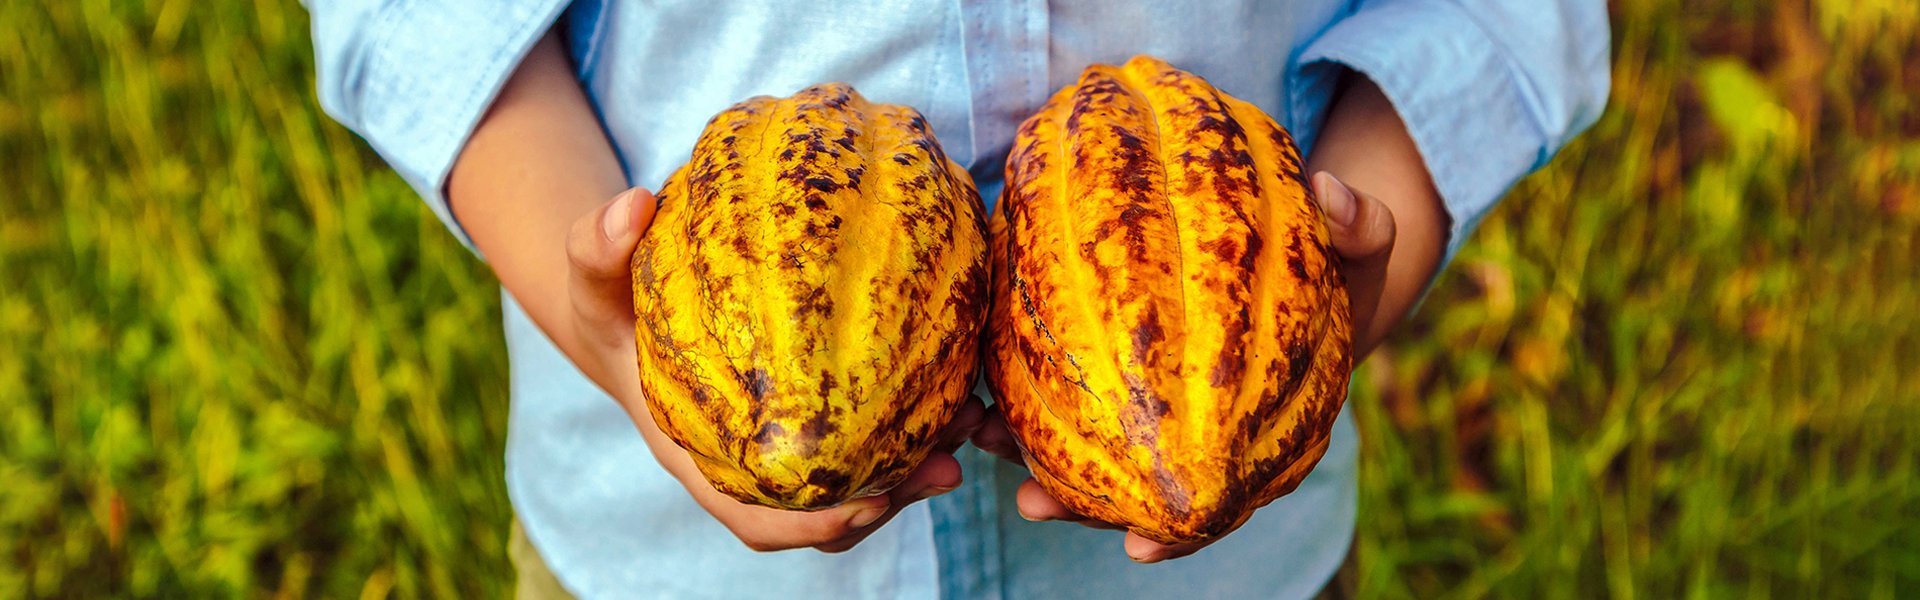 Cacao Colombiano / Colombian Cocoa